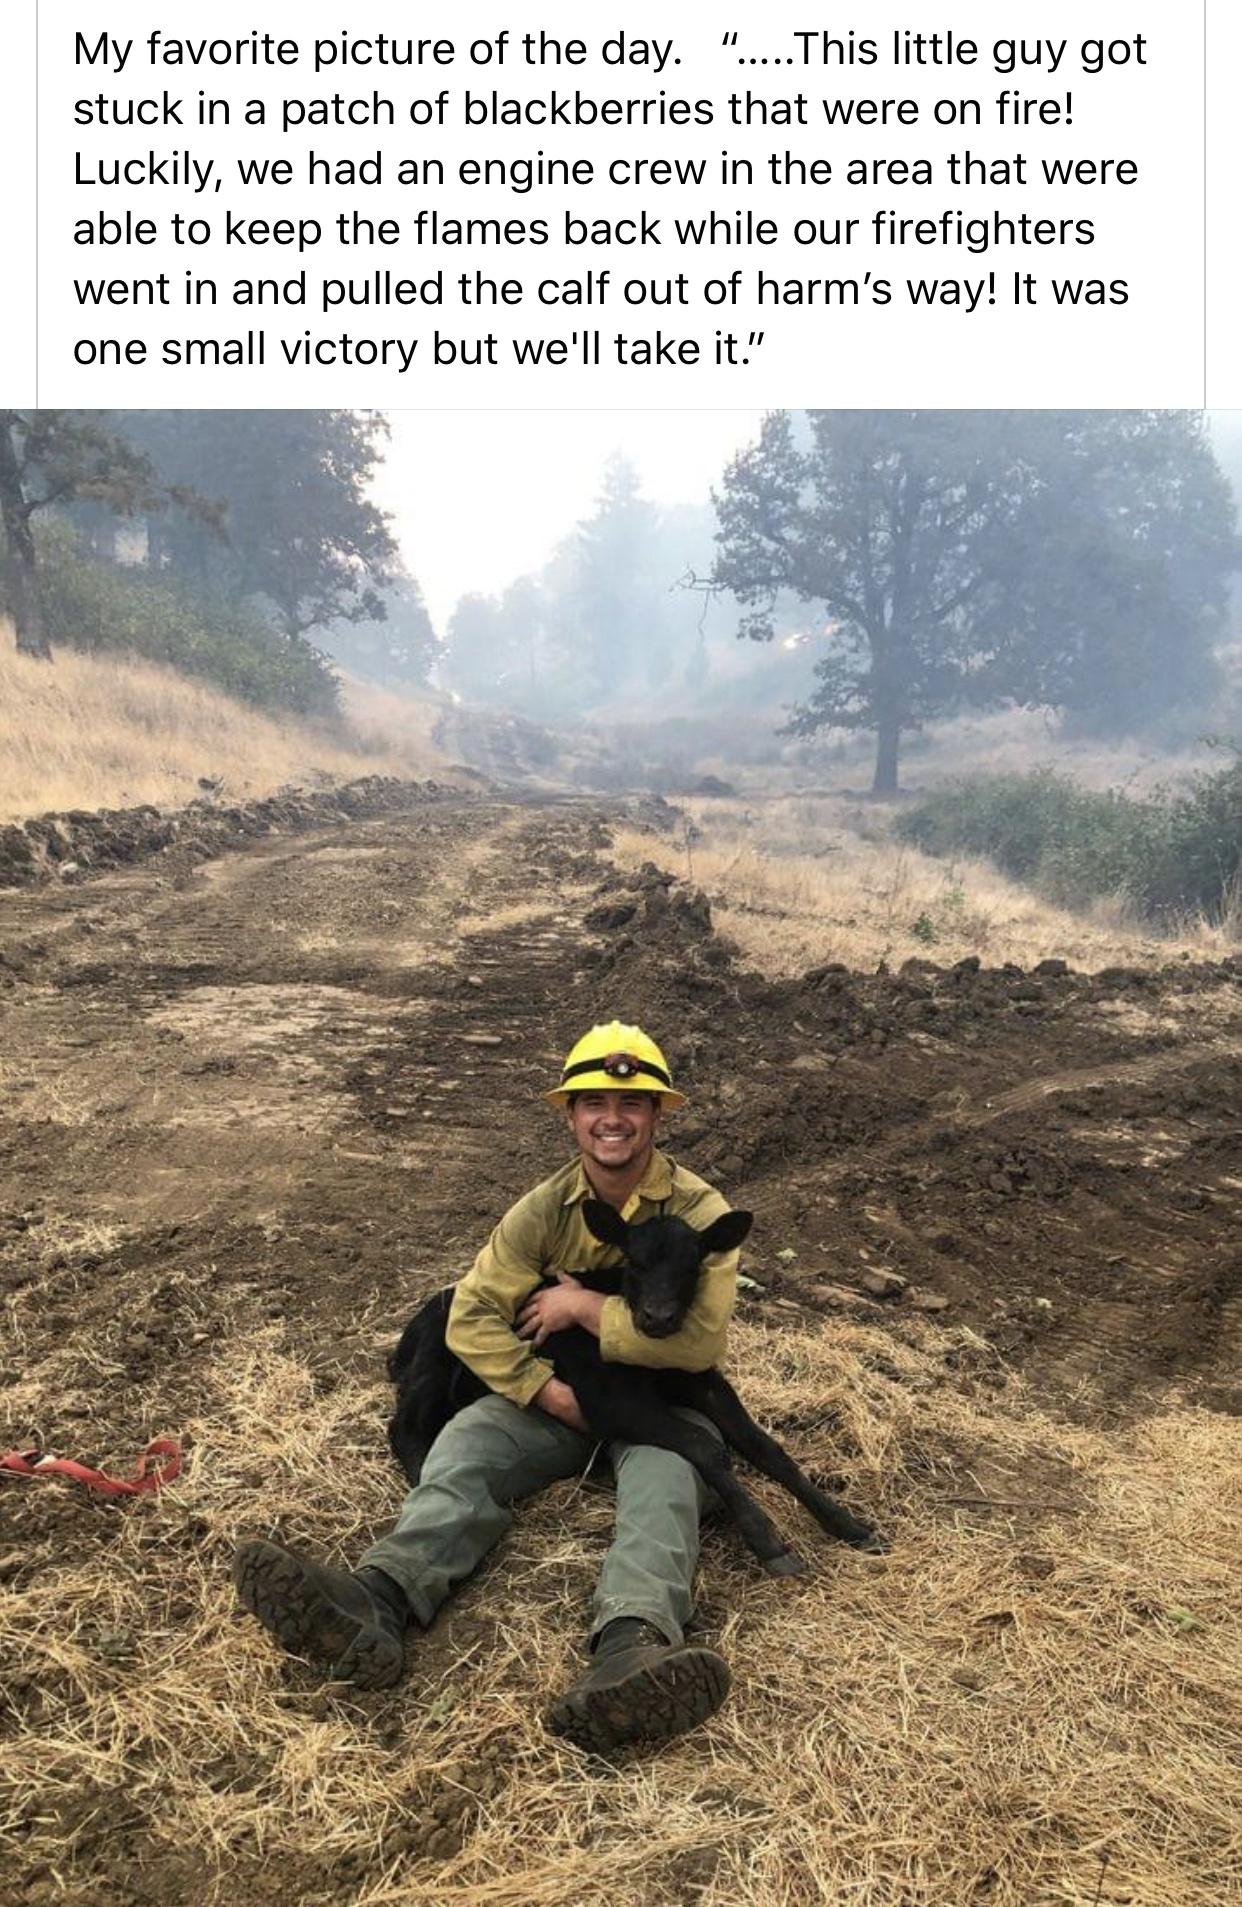 tree - My favorite picture of the day. "...This little guy got stuck in a patch of blackberries that were on fire! Luckily, we had an engine crew in the area that were able to keep the flames back while our firefighters went in and pulled the calf out of 